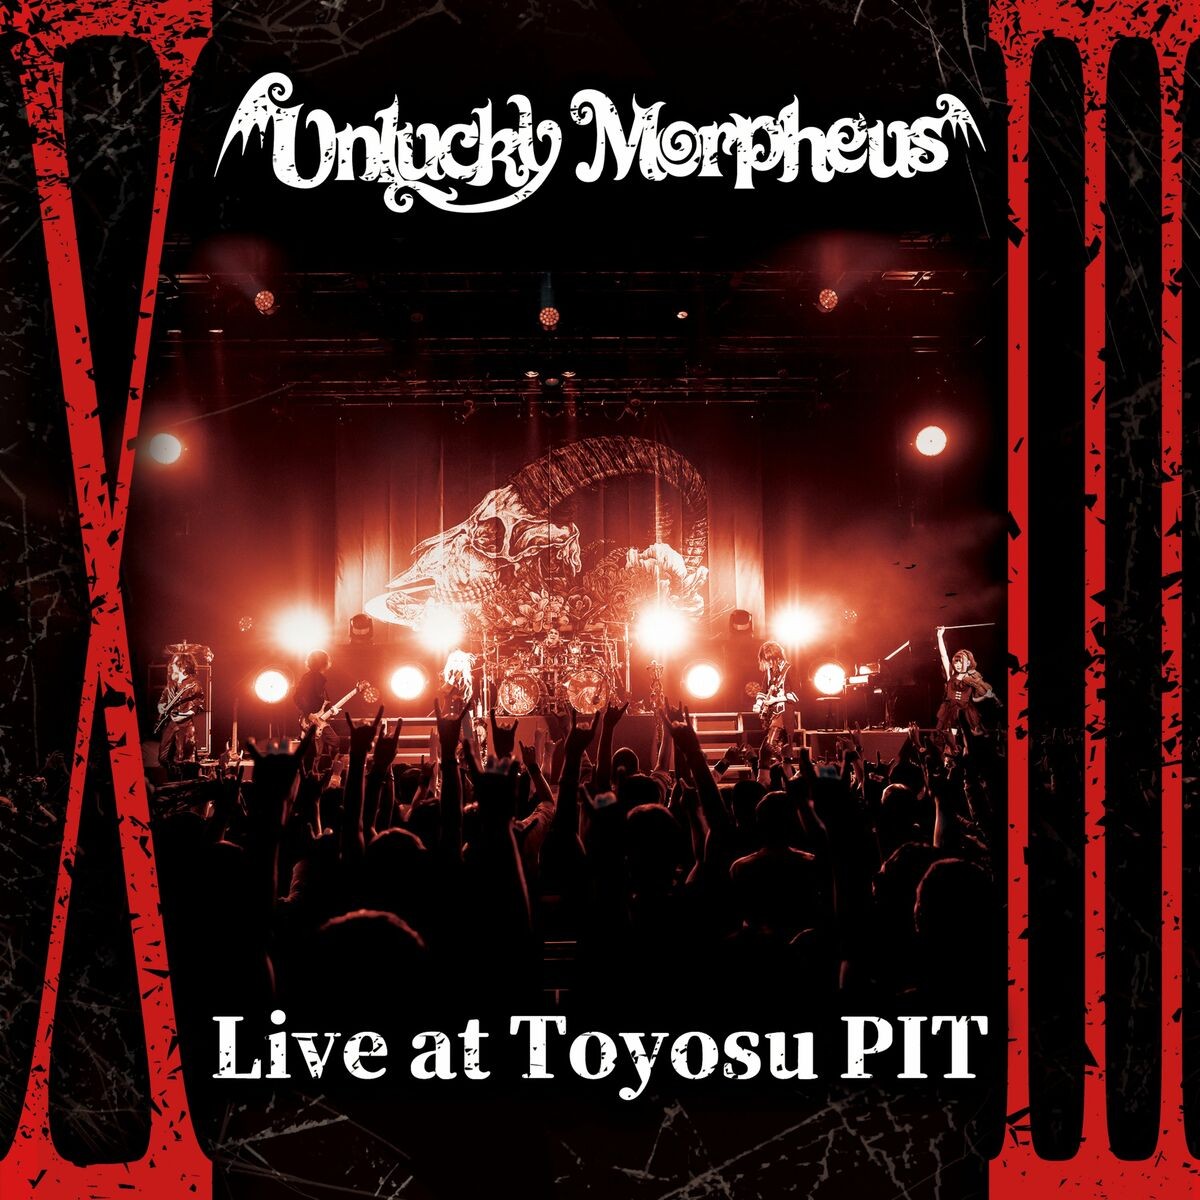 Unlucky Morpheus – ”XIII” Live at Toyosu Pit [FLAC / WEB] [2022.03.09]